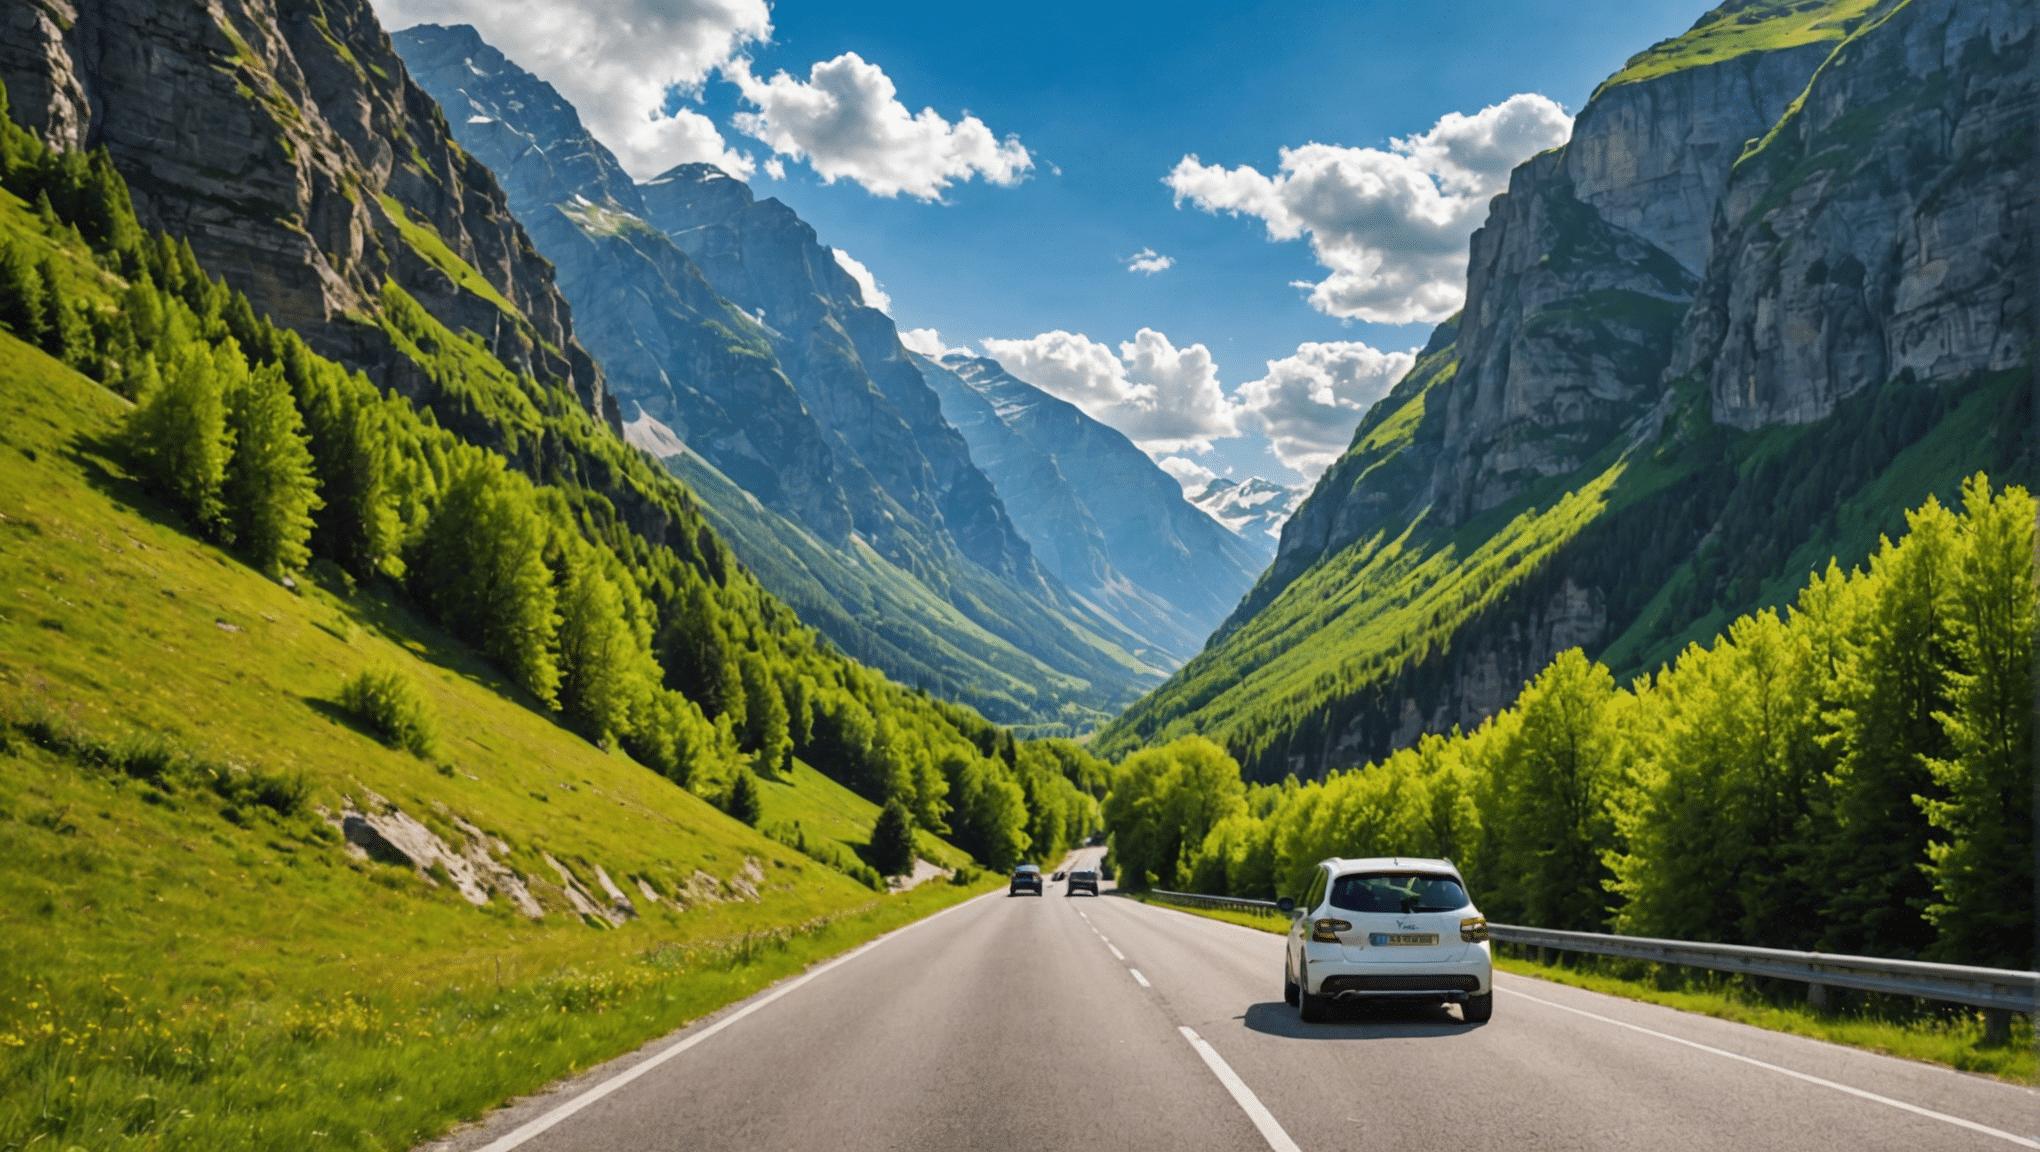 discover the most beautiful road trips in europe and enjoy an unforgettable summer through magnificent landscapes, picturesque towns and unforgettable adventures.